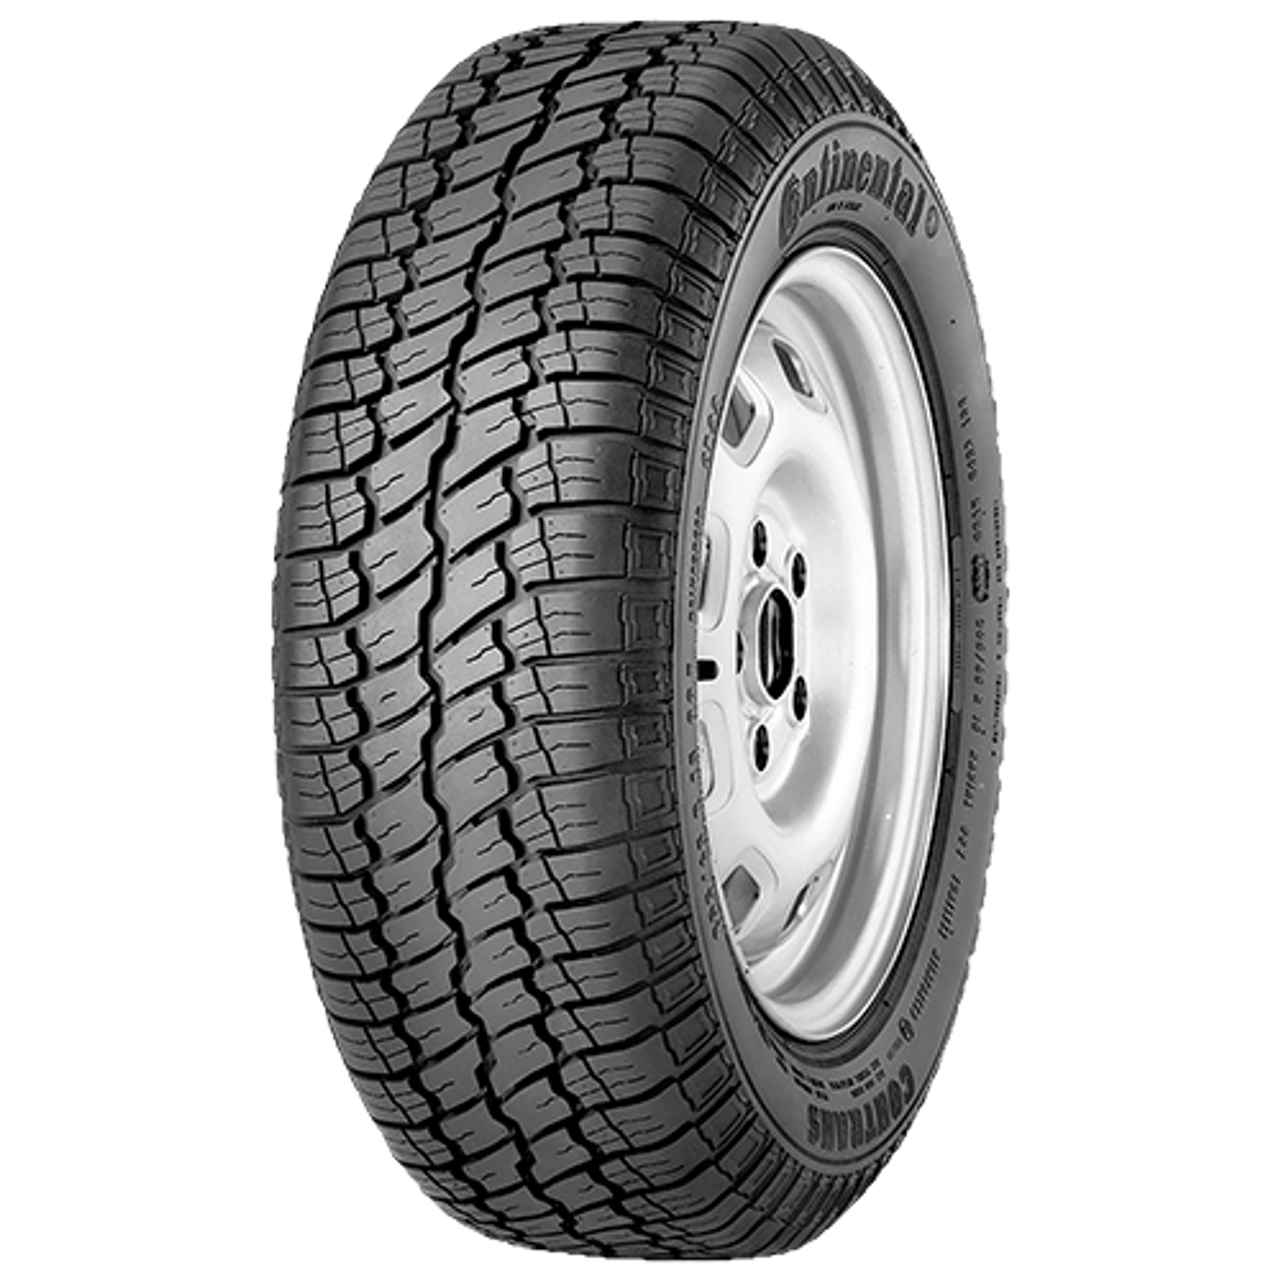 CONTINENTAL CT 22 165/80R15 87T BSW